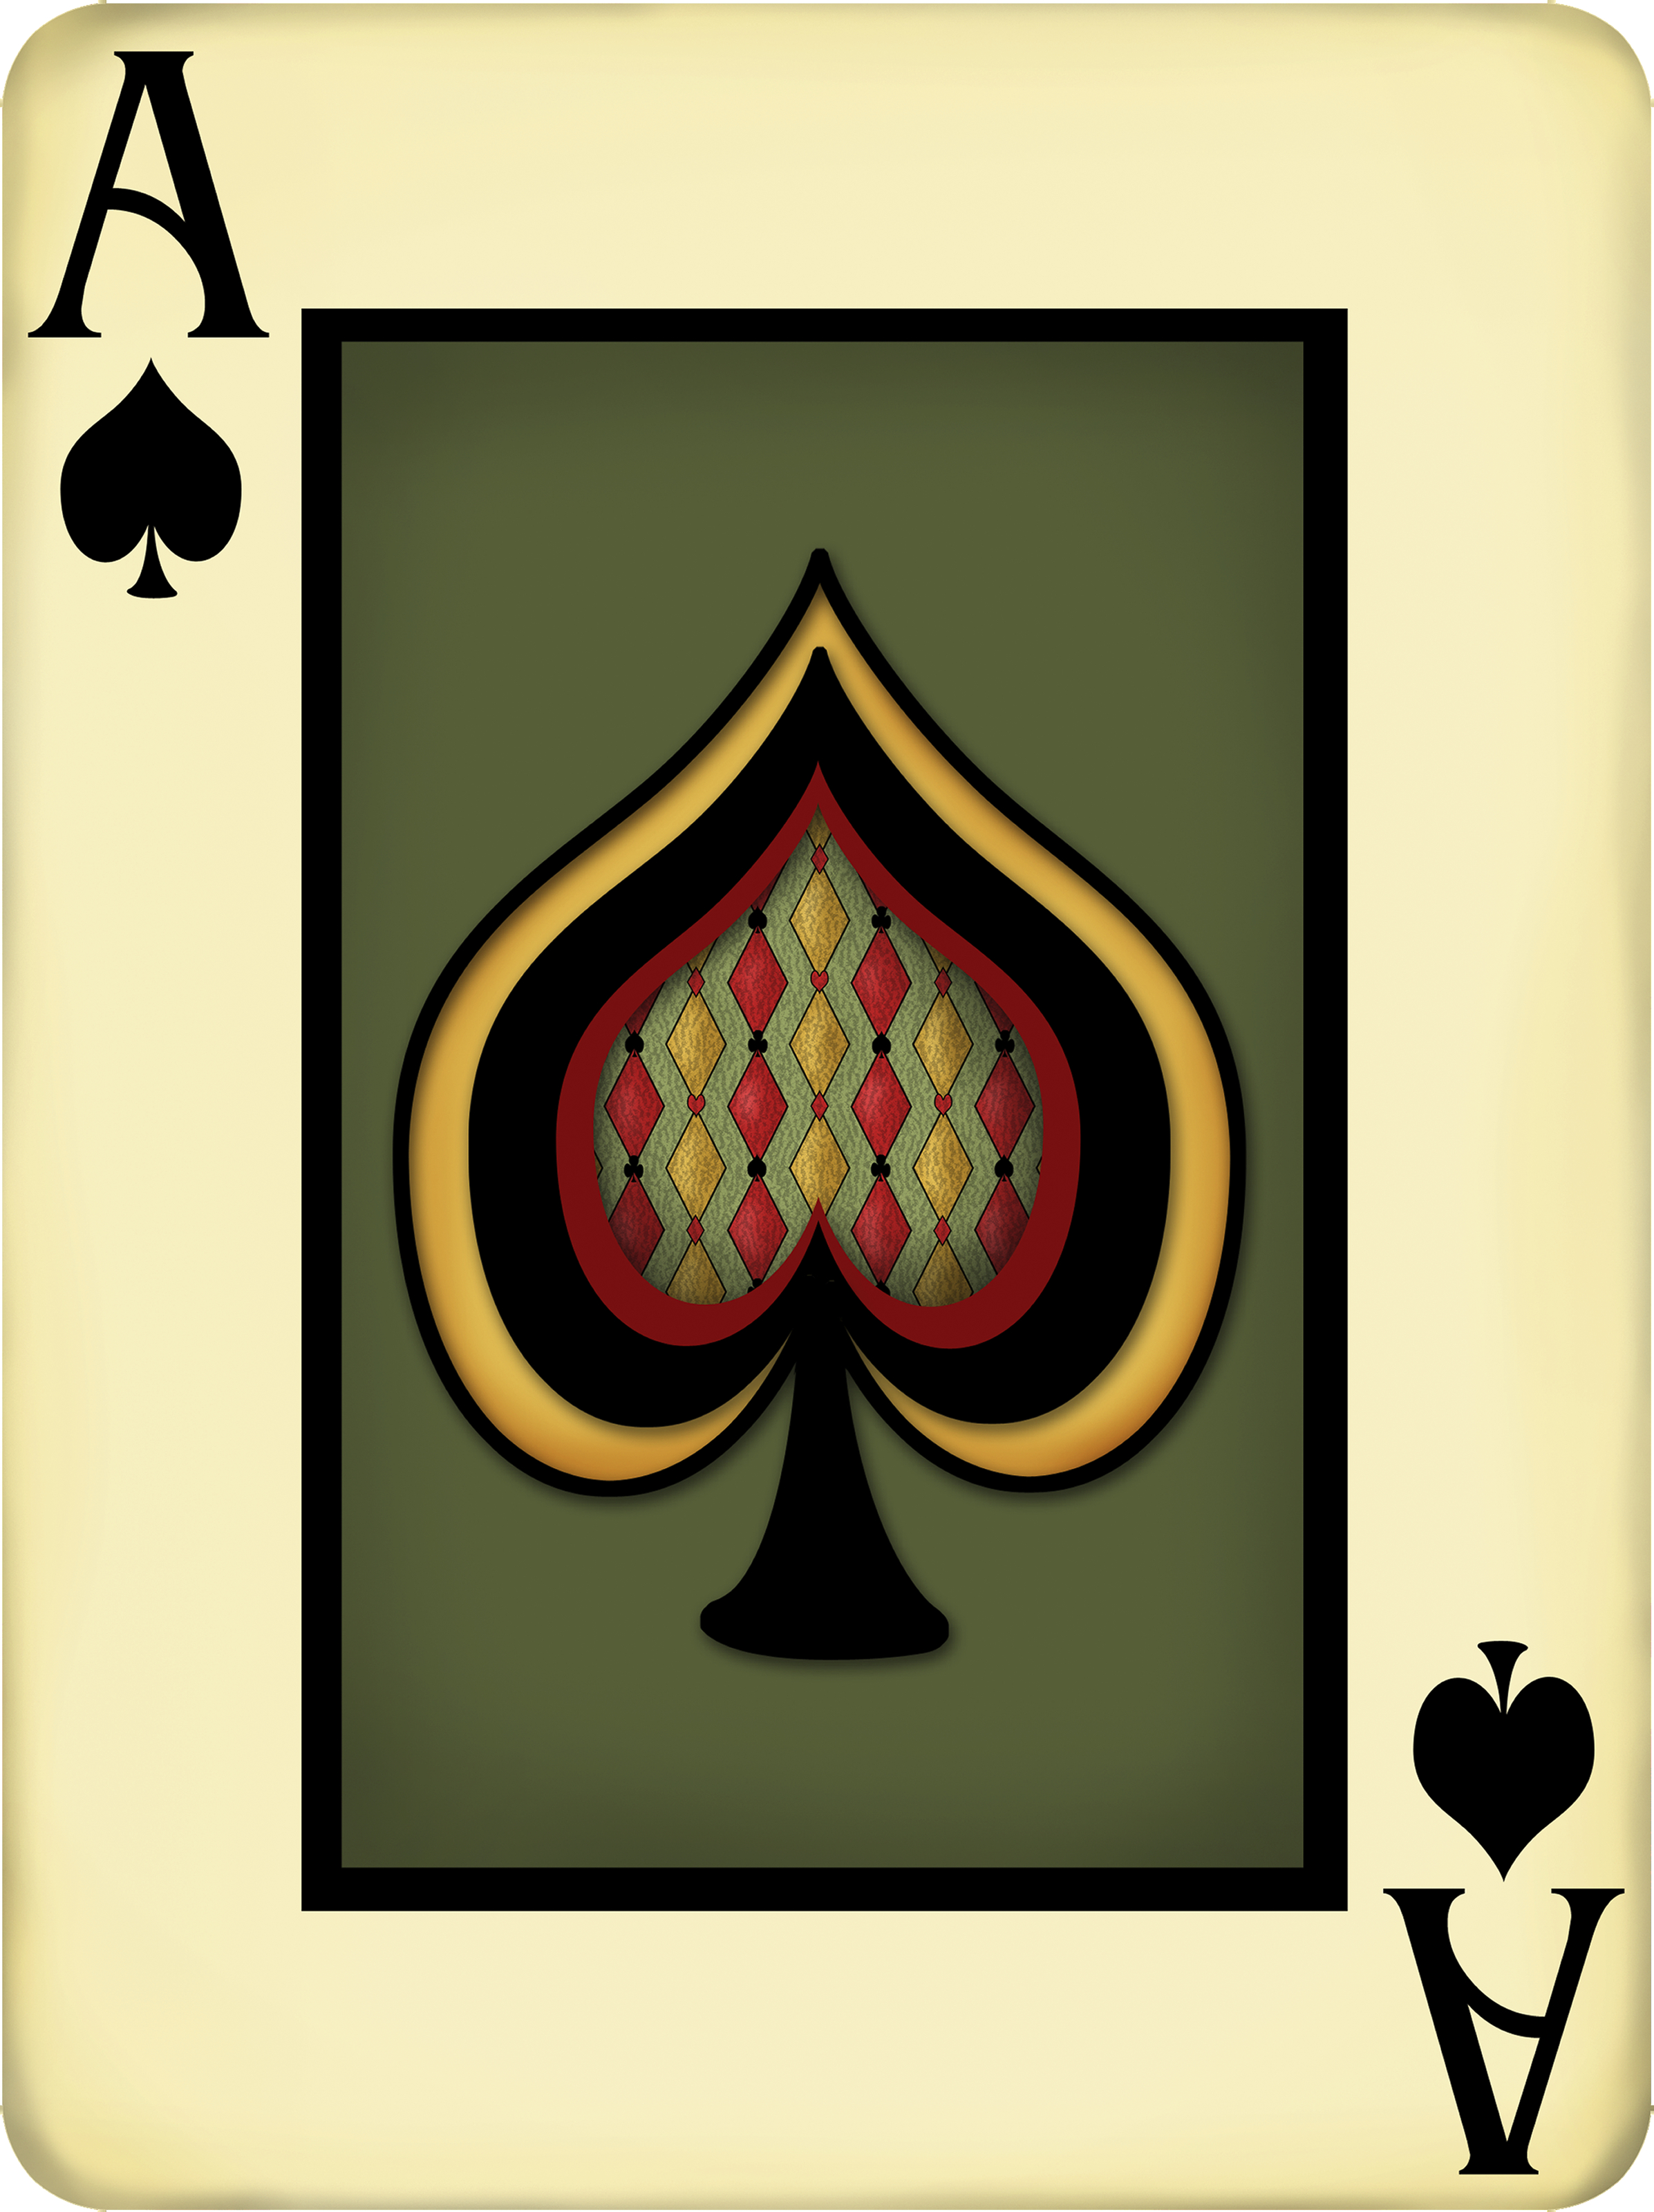 wallpaper gold ace of spades